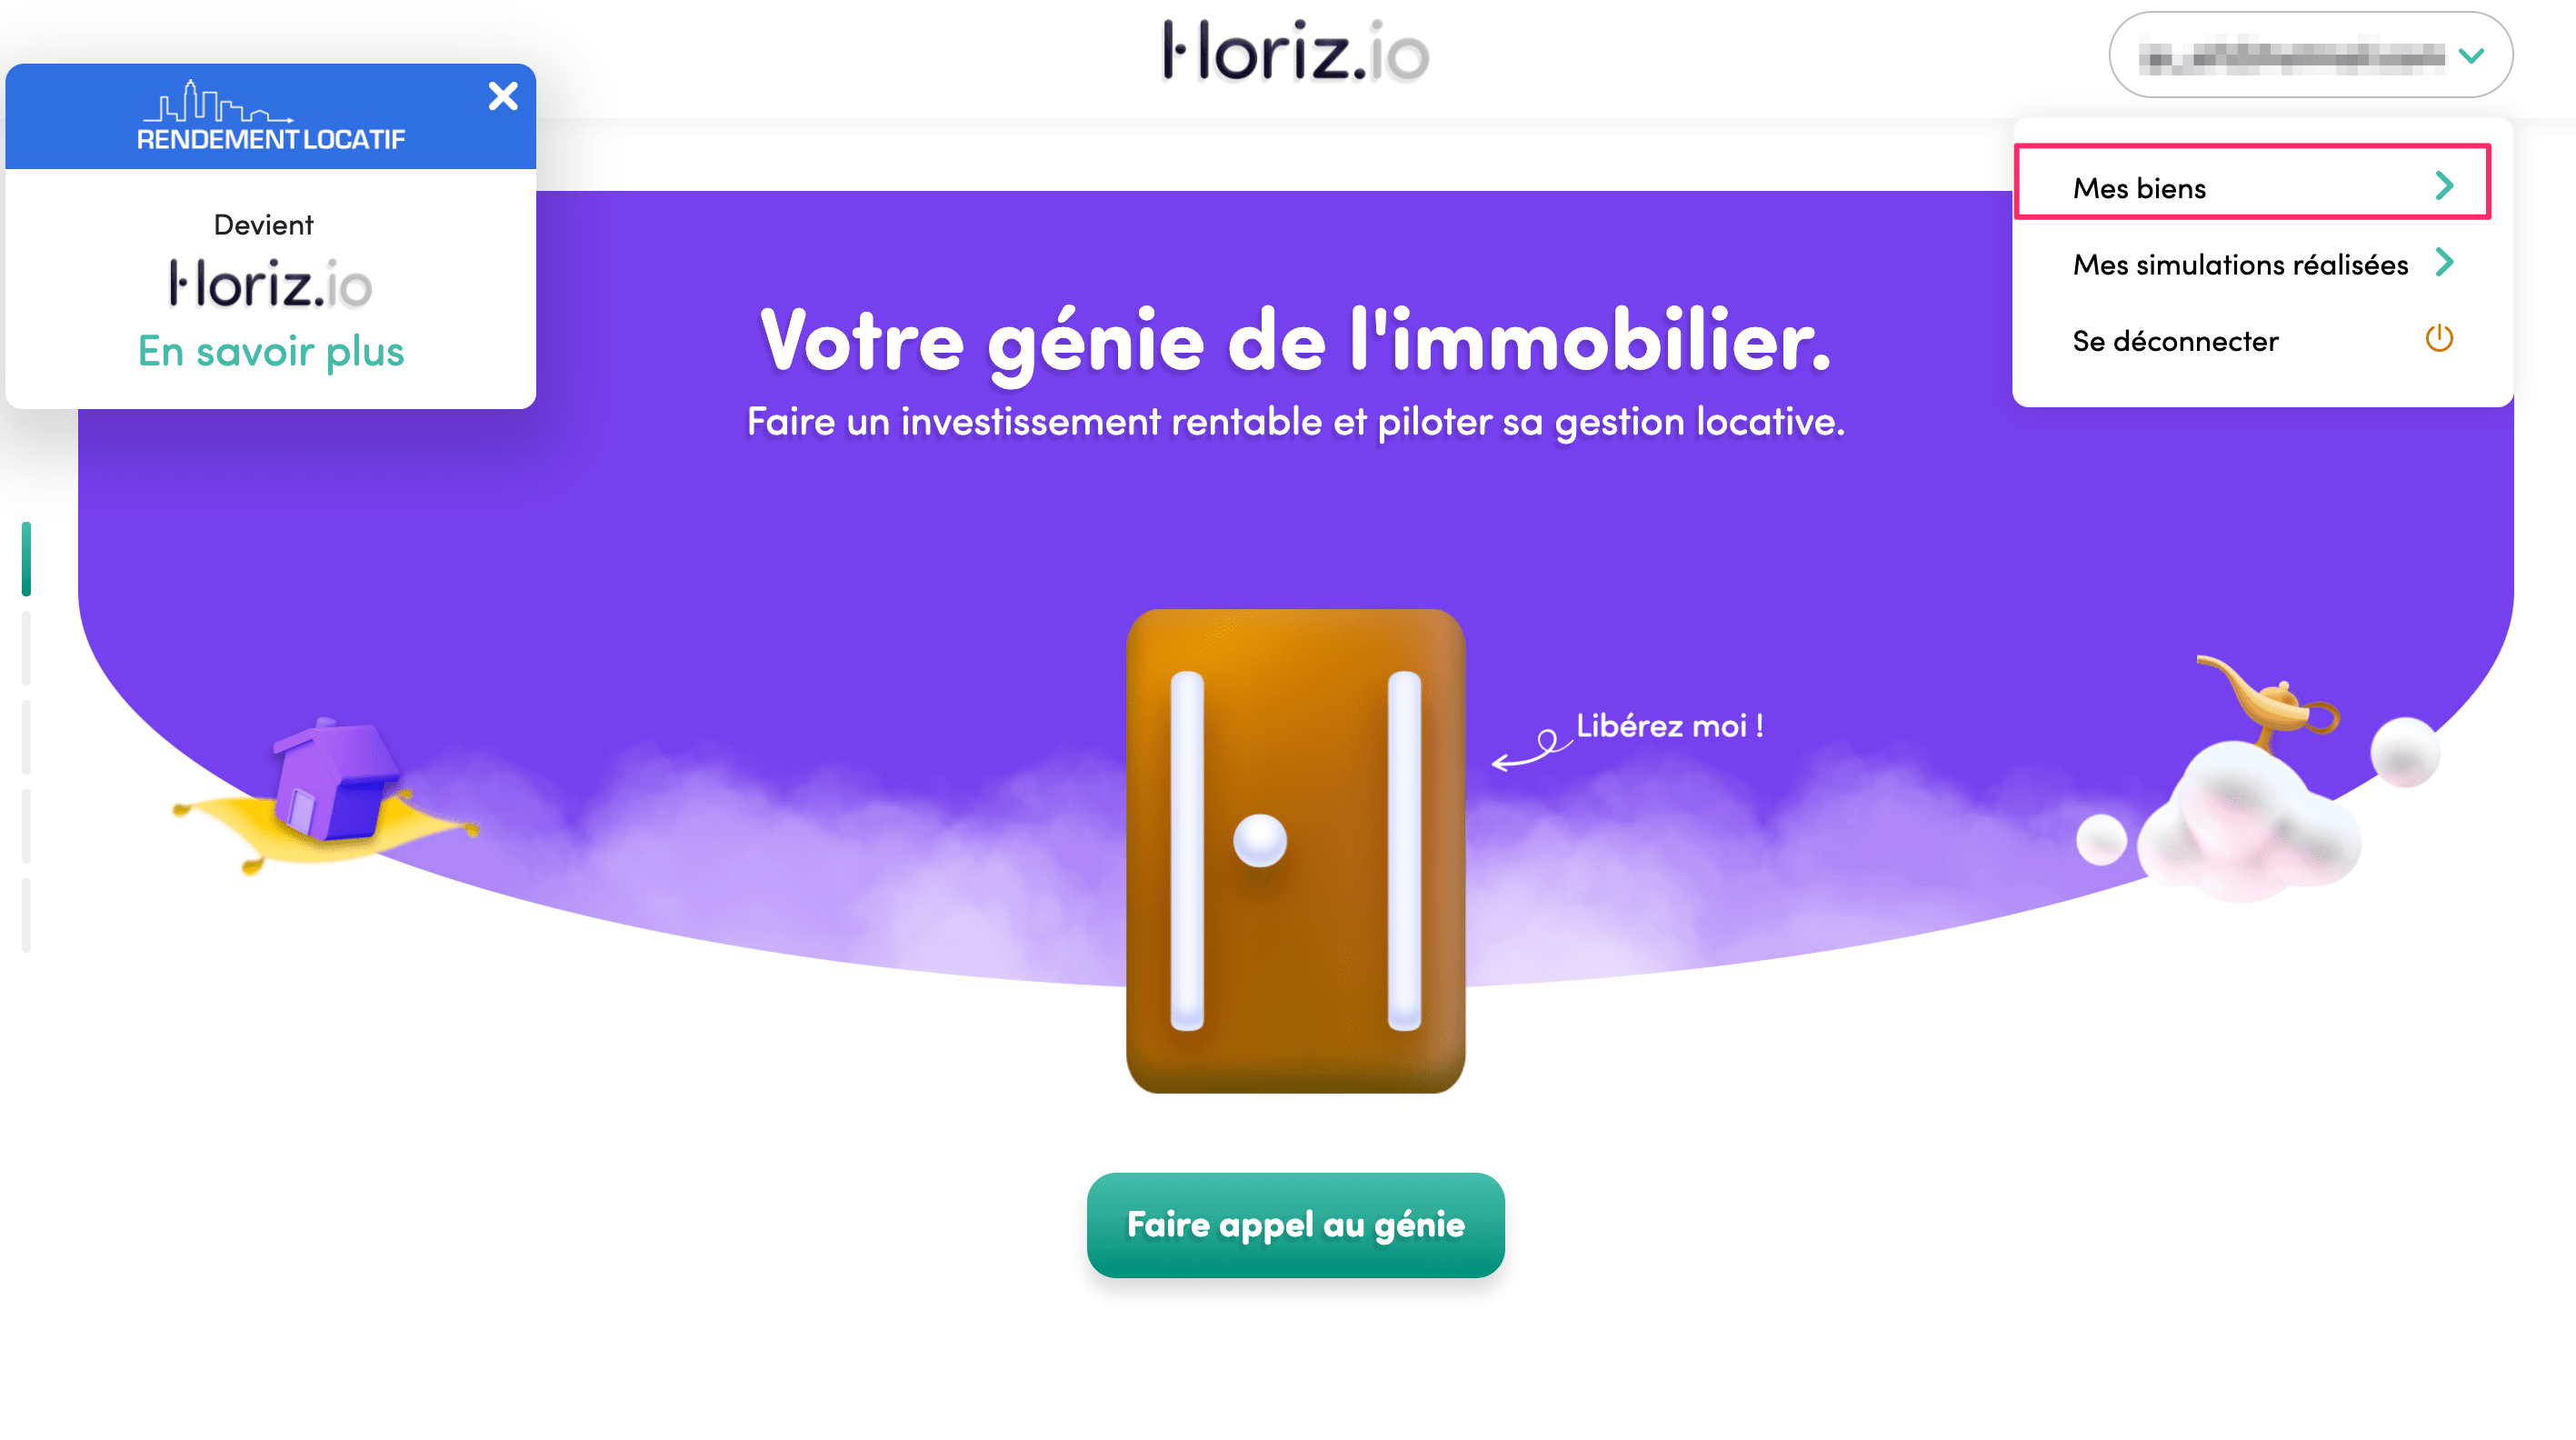 home-page-mes-biens.png